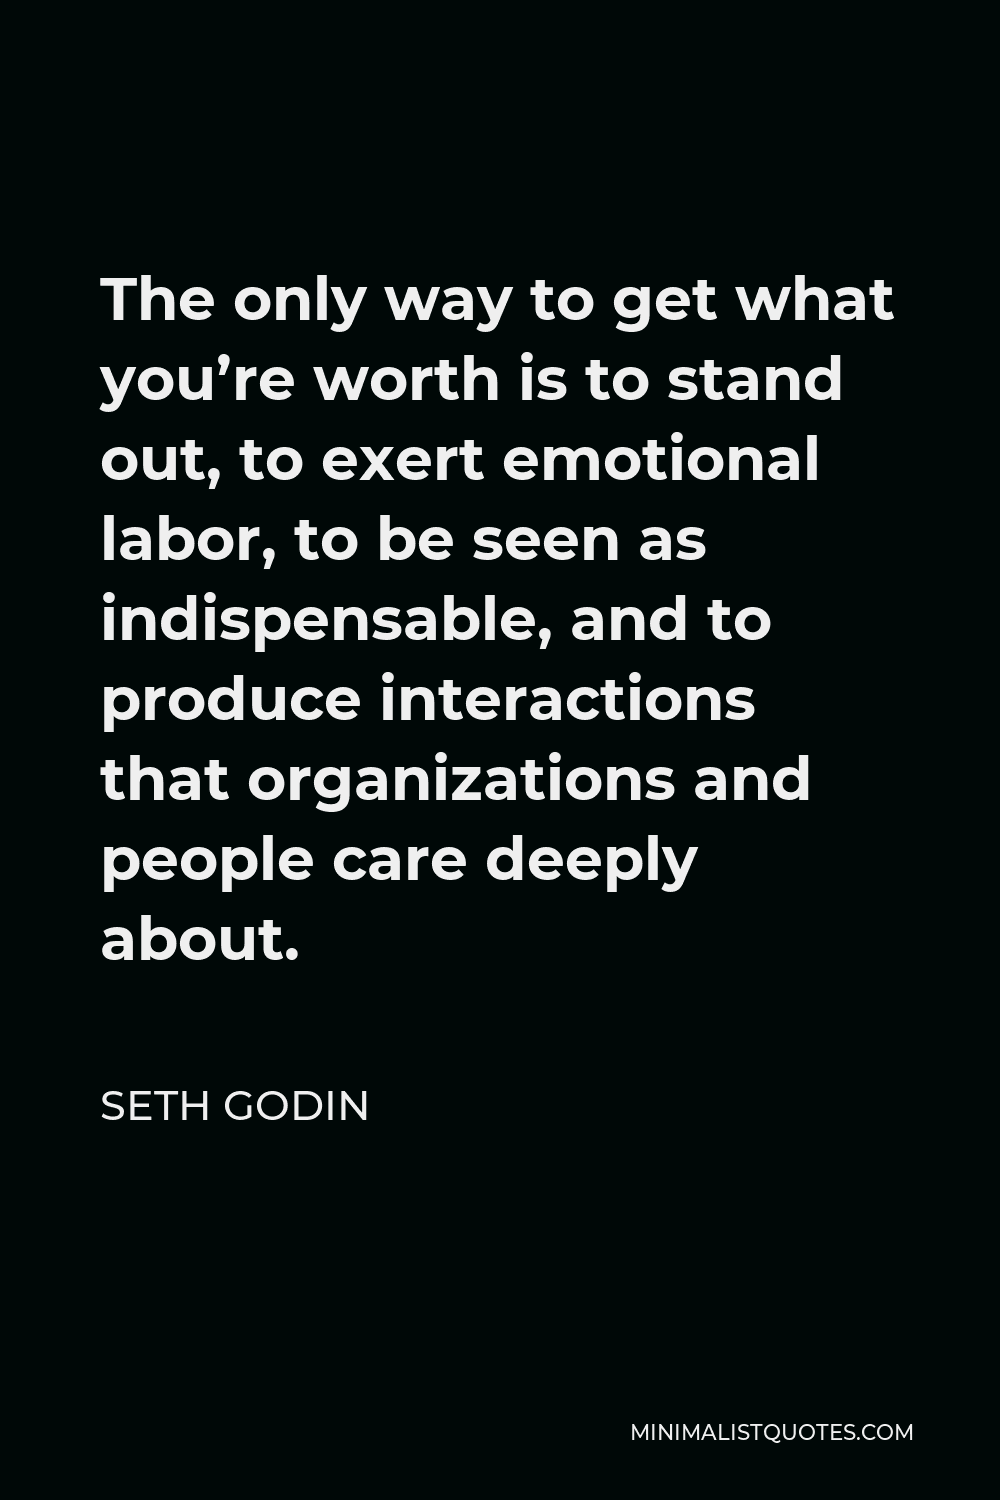 Seth Godin Quote - The only way to get what you’re worth is to stand out, to exert emotional labor, to be seen as indispensable, and to produce interactions that organizations and people care deeply about.